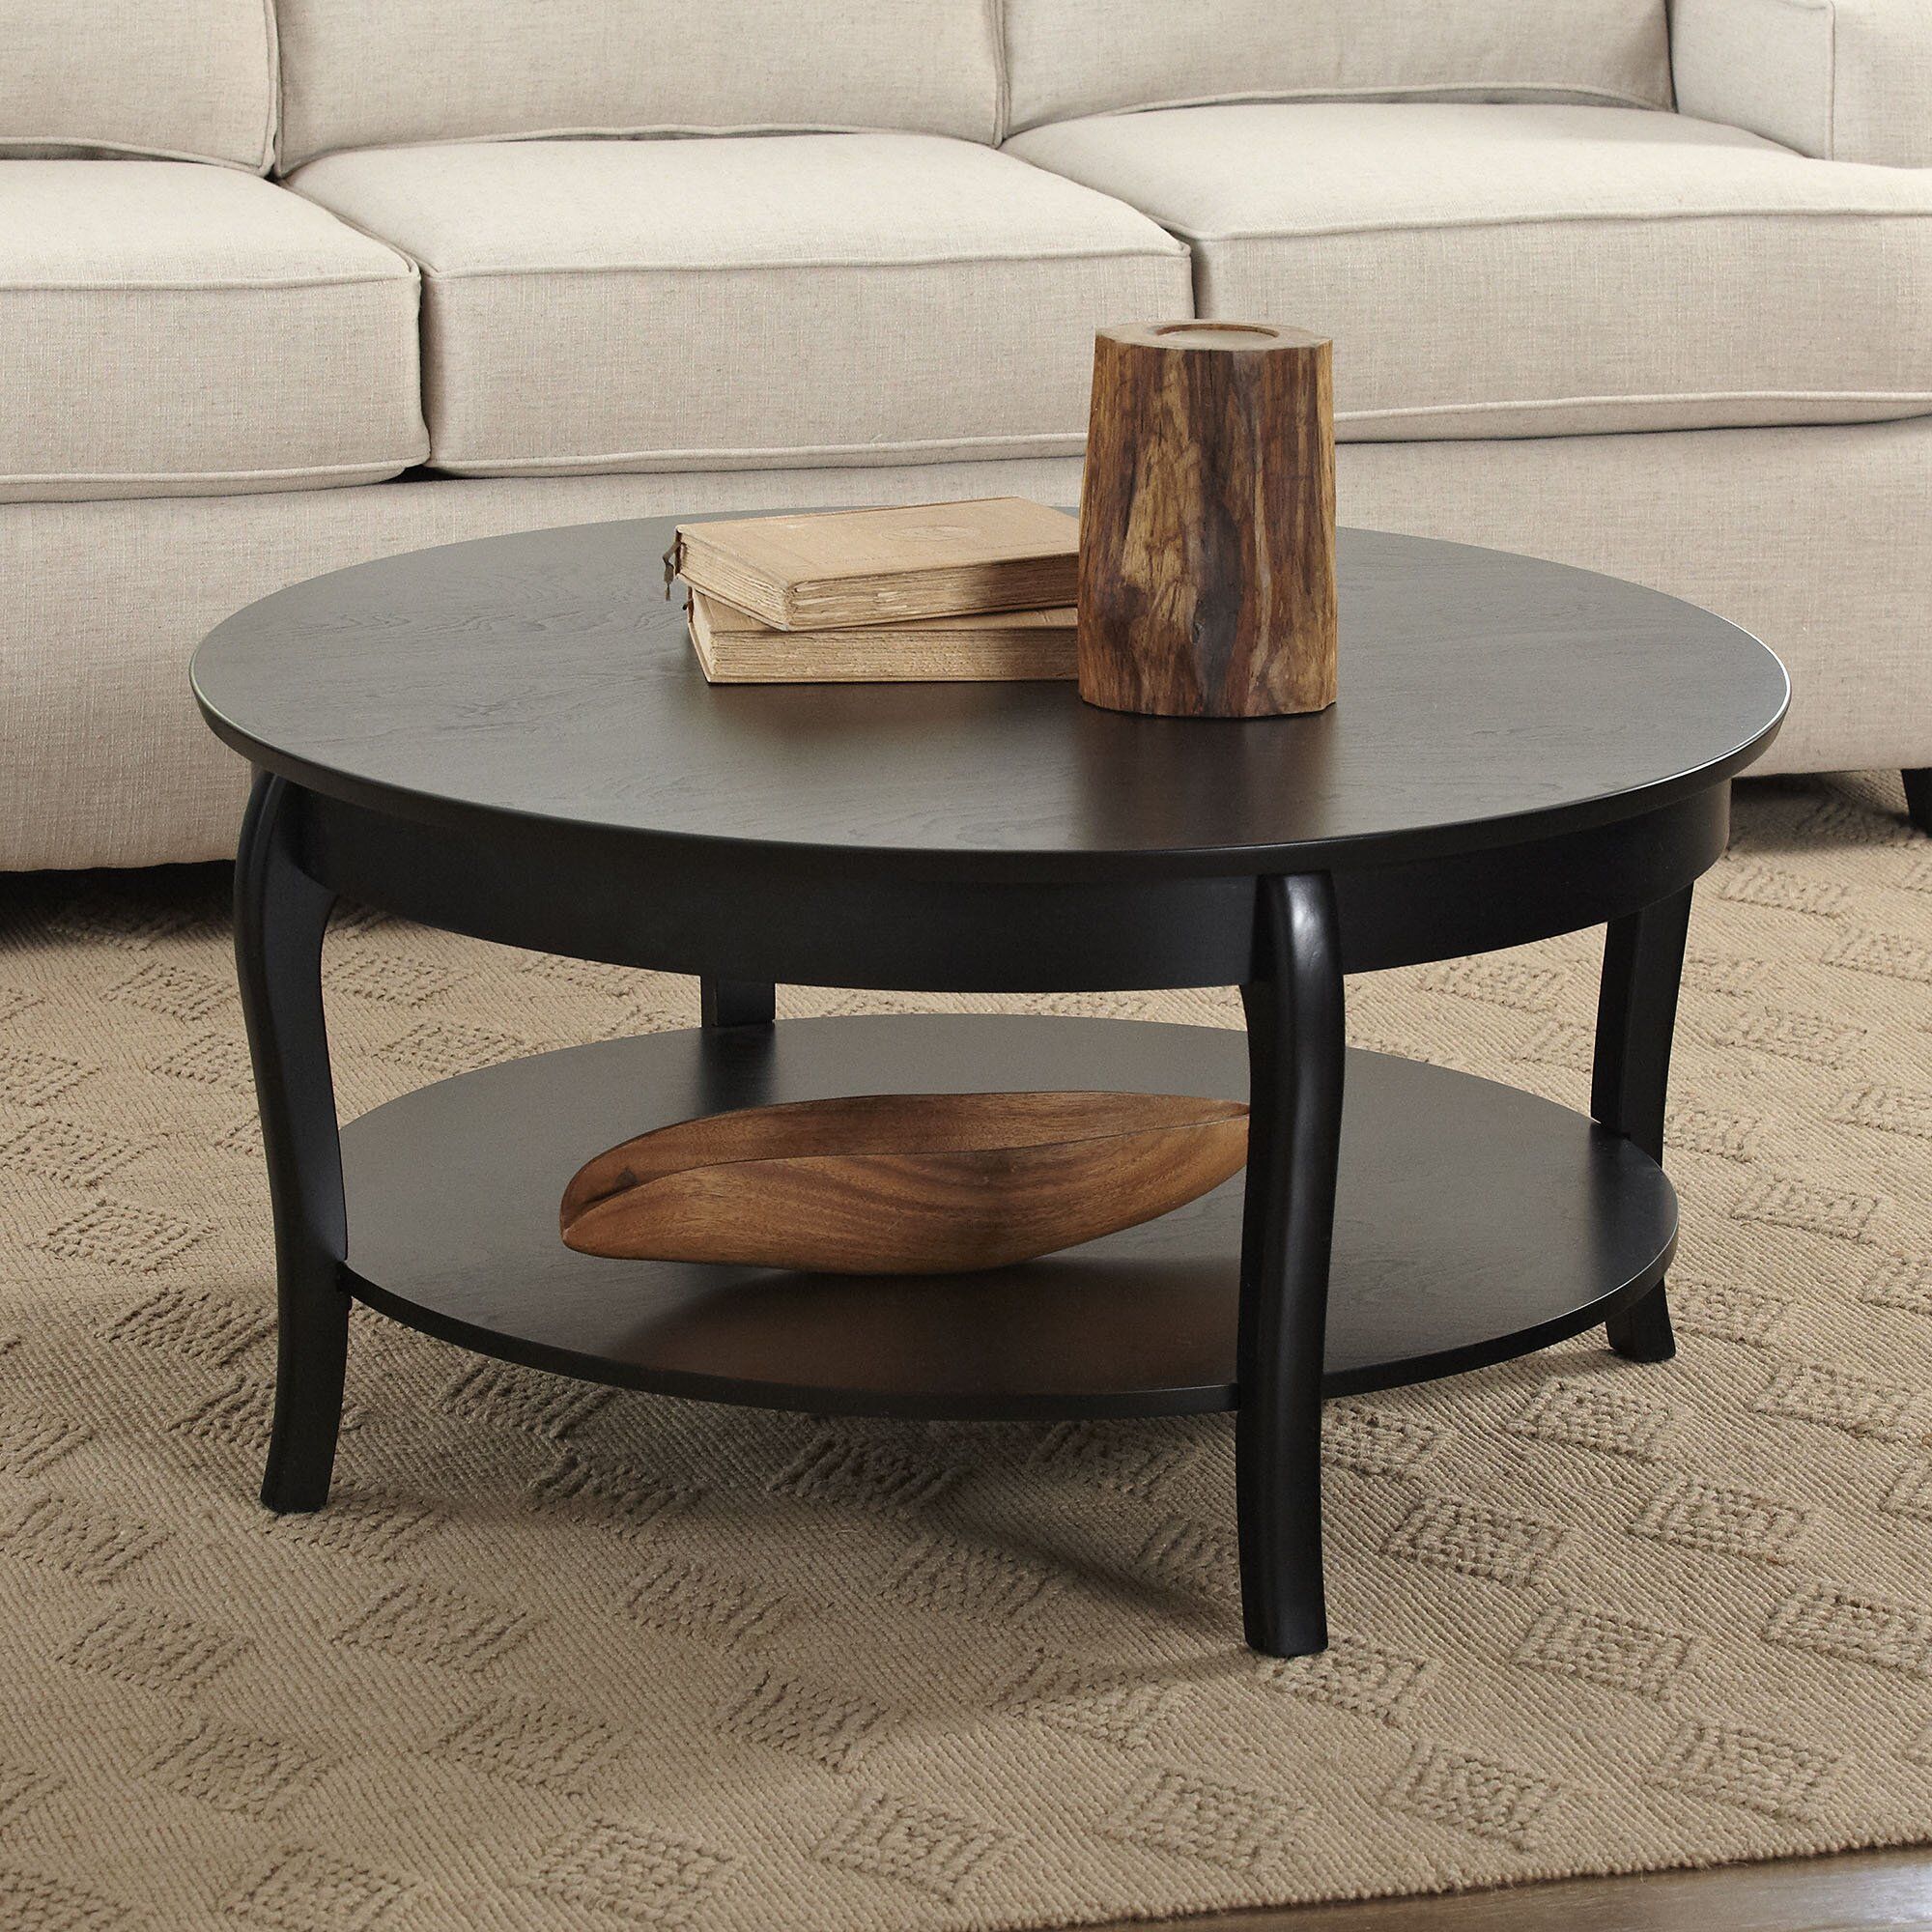 Birch Lane Alberts Round Coffee Table & Reviews | Wayfair With Regard To Round Coffee Tables (View 14 of 15)